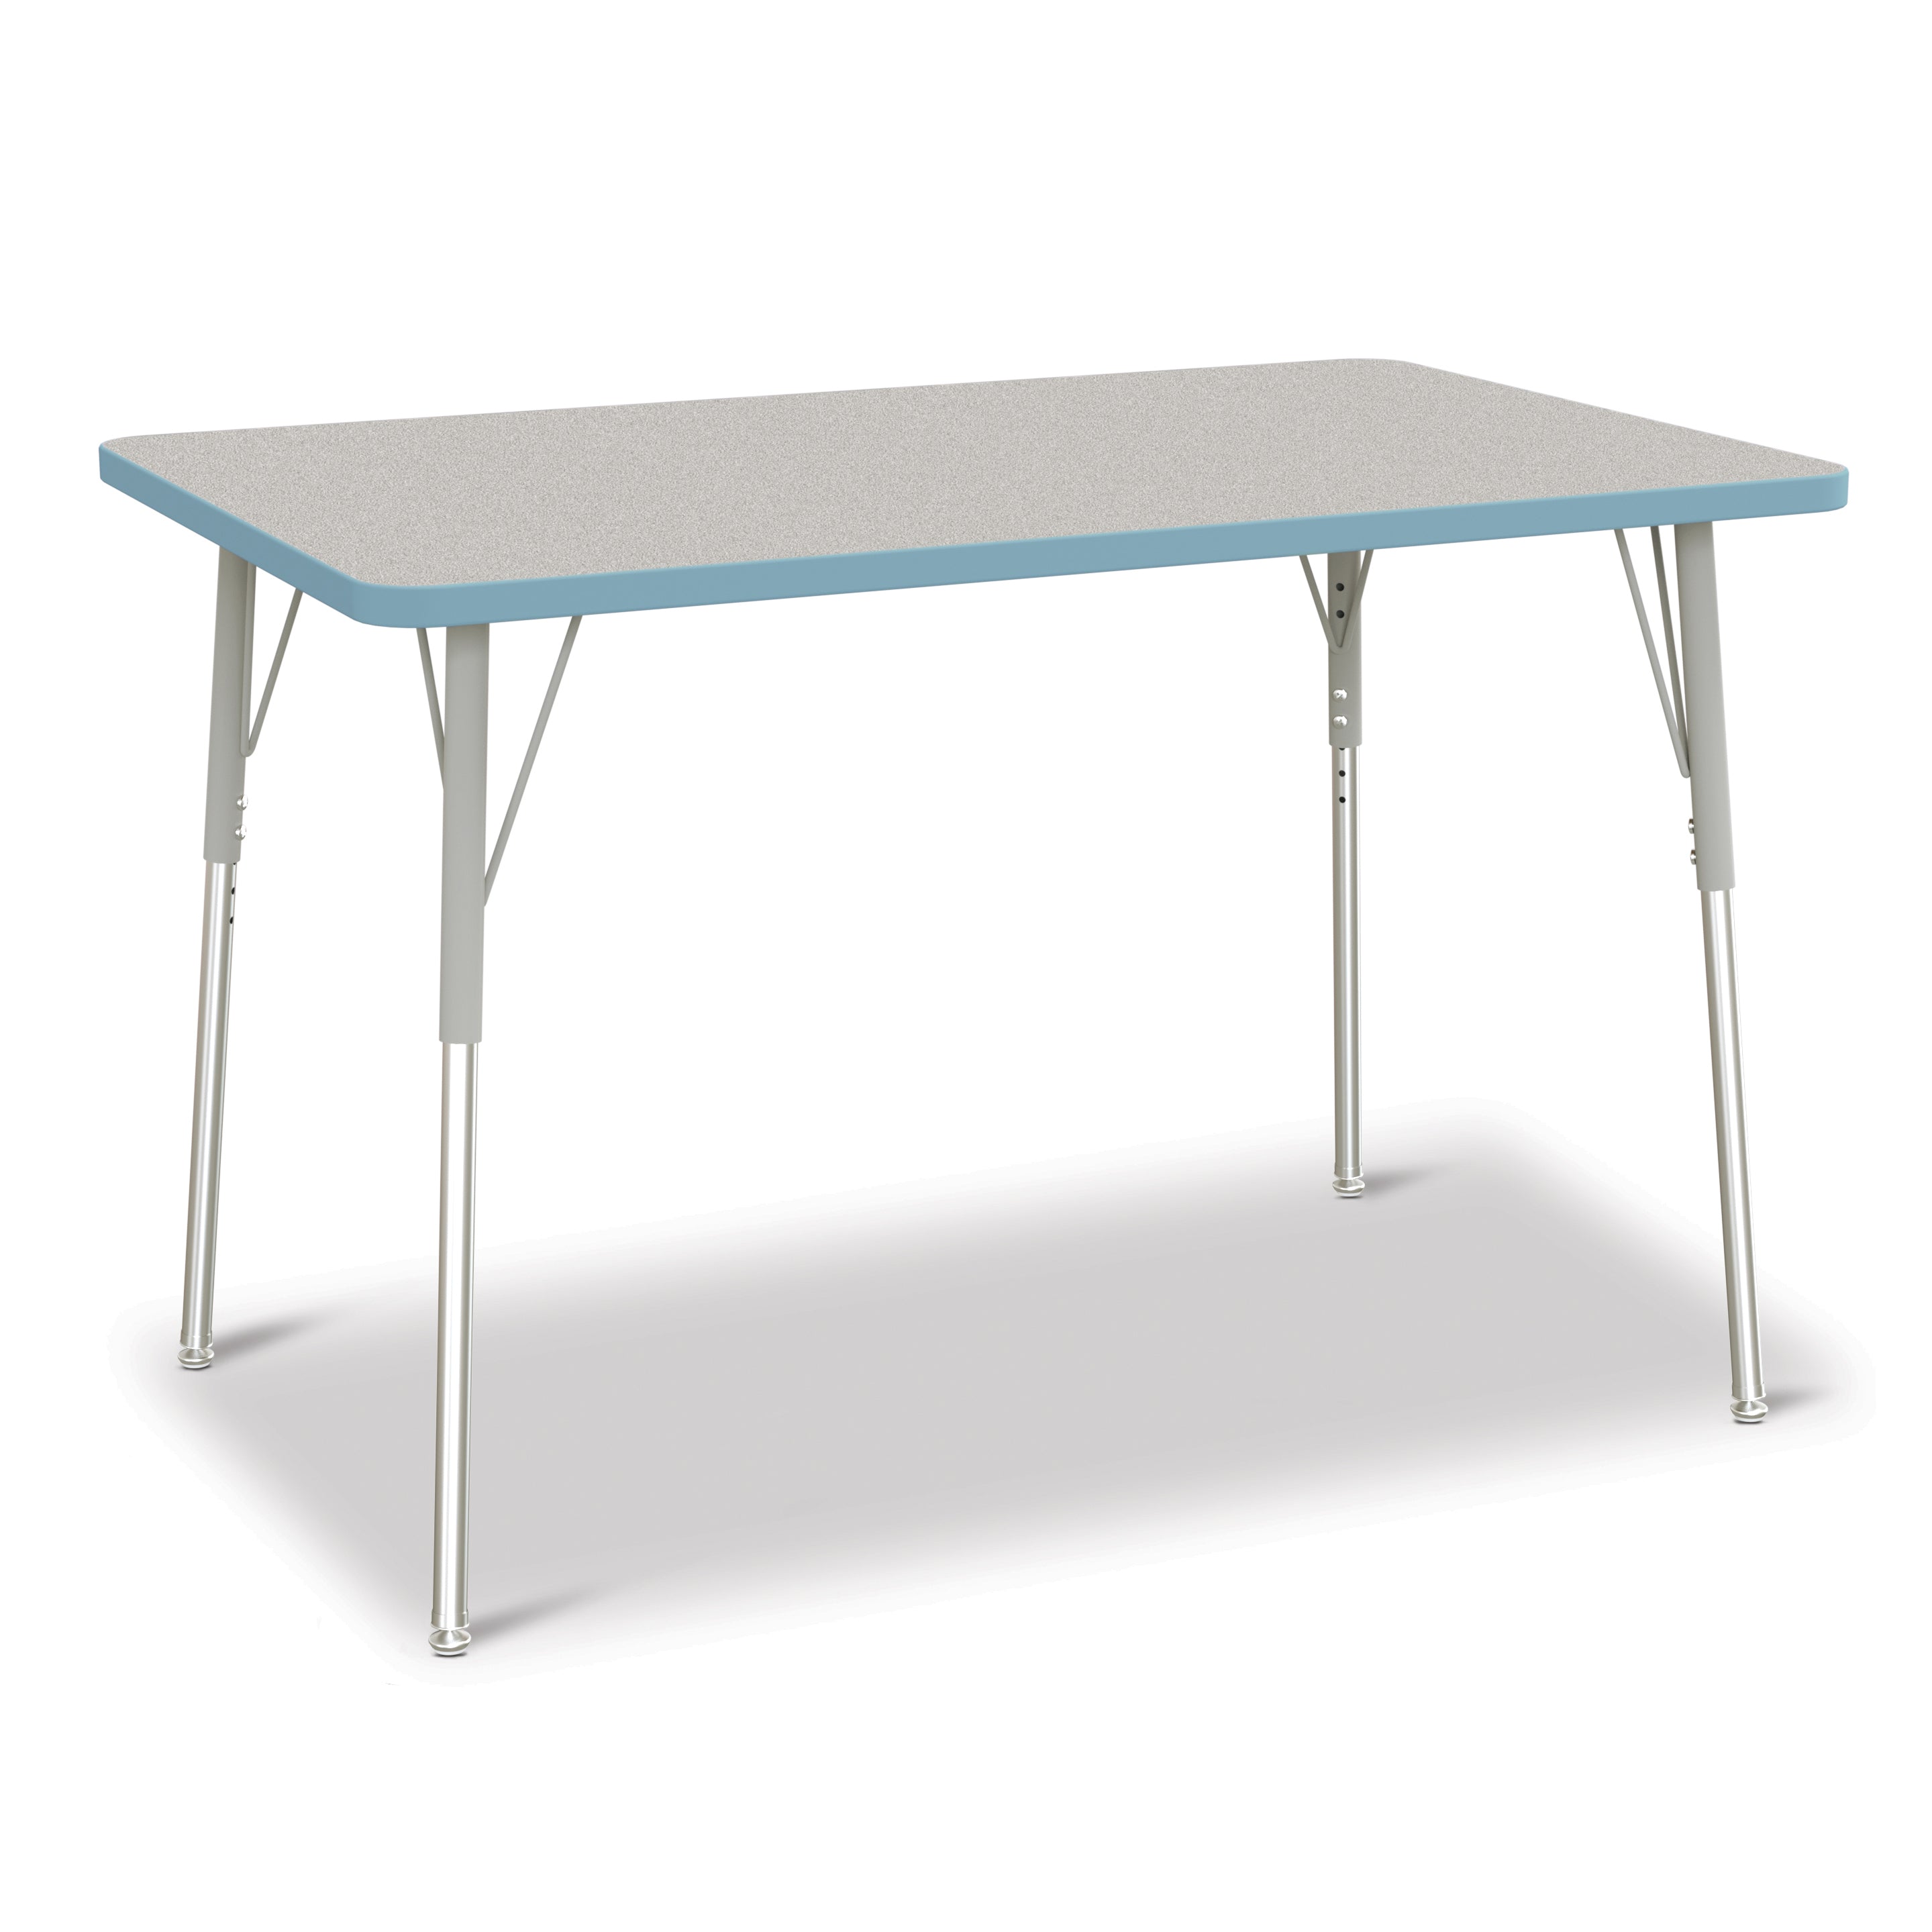 6473JCA131, Berries Rectangle Activity Table - 30" X 48", A-height - Freckled Gray/Coastal Blue/Gray